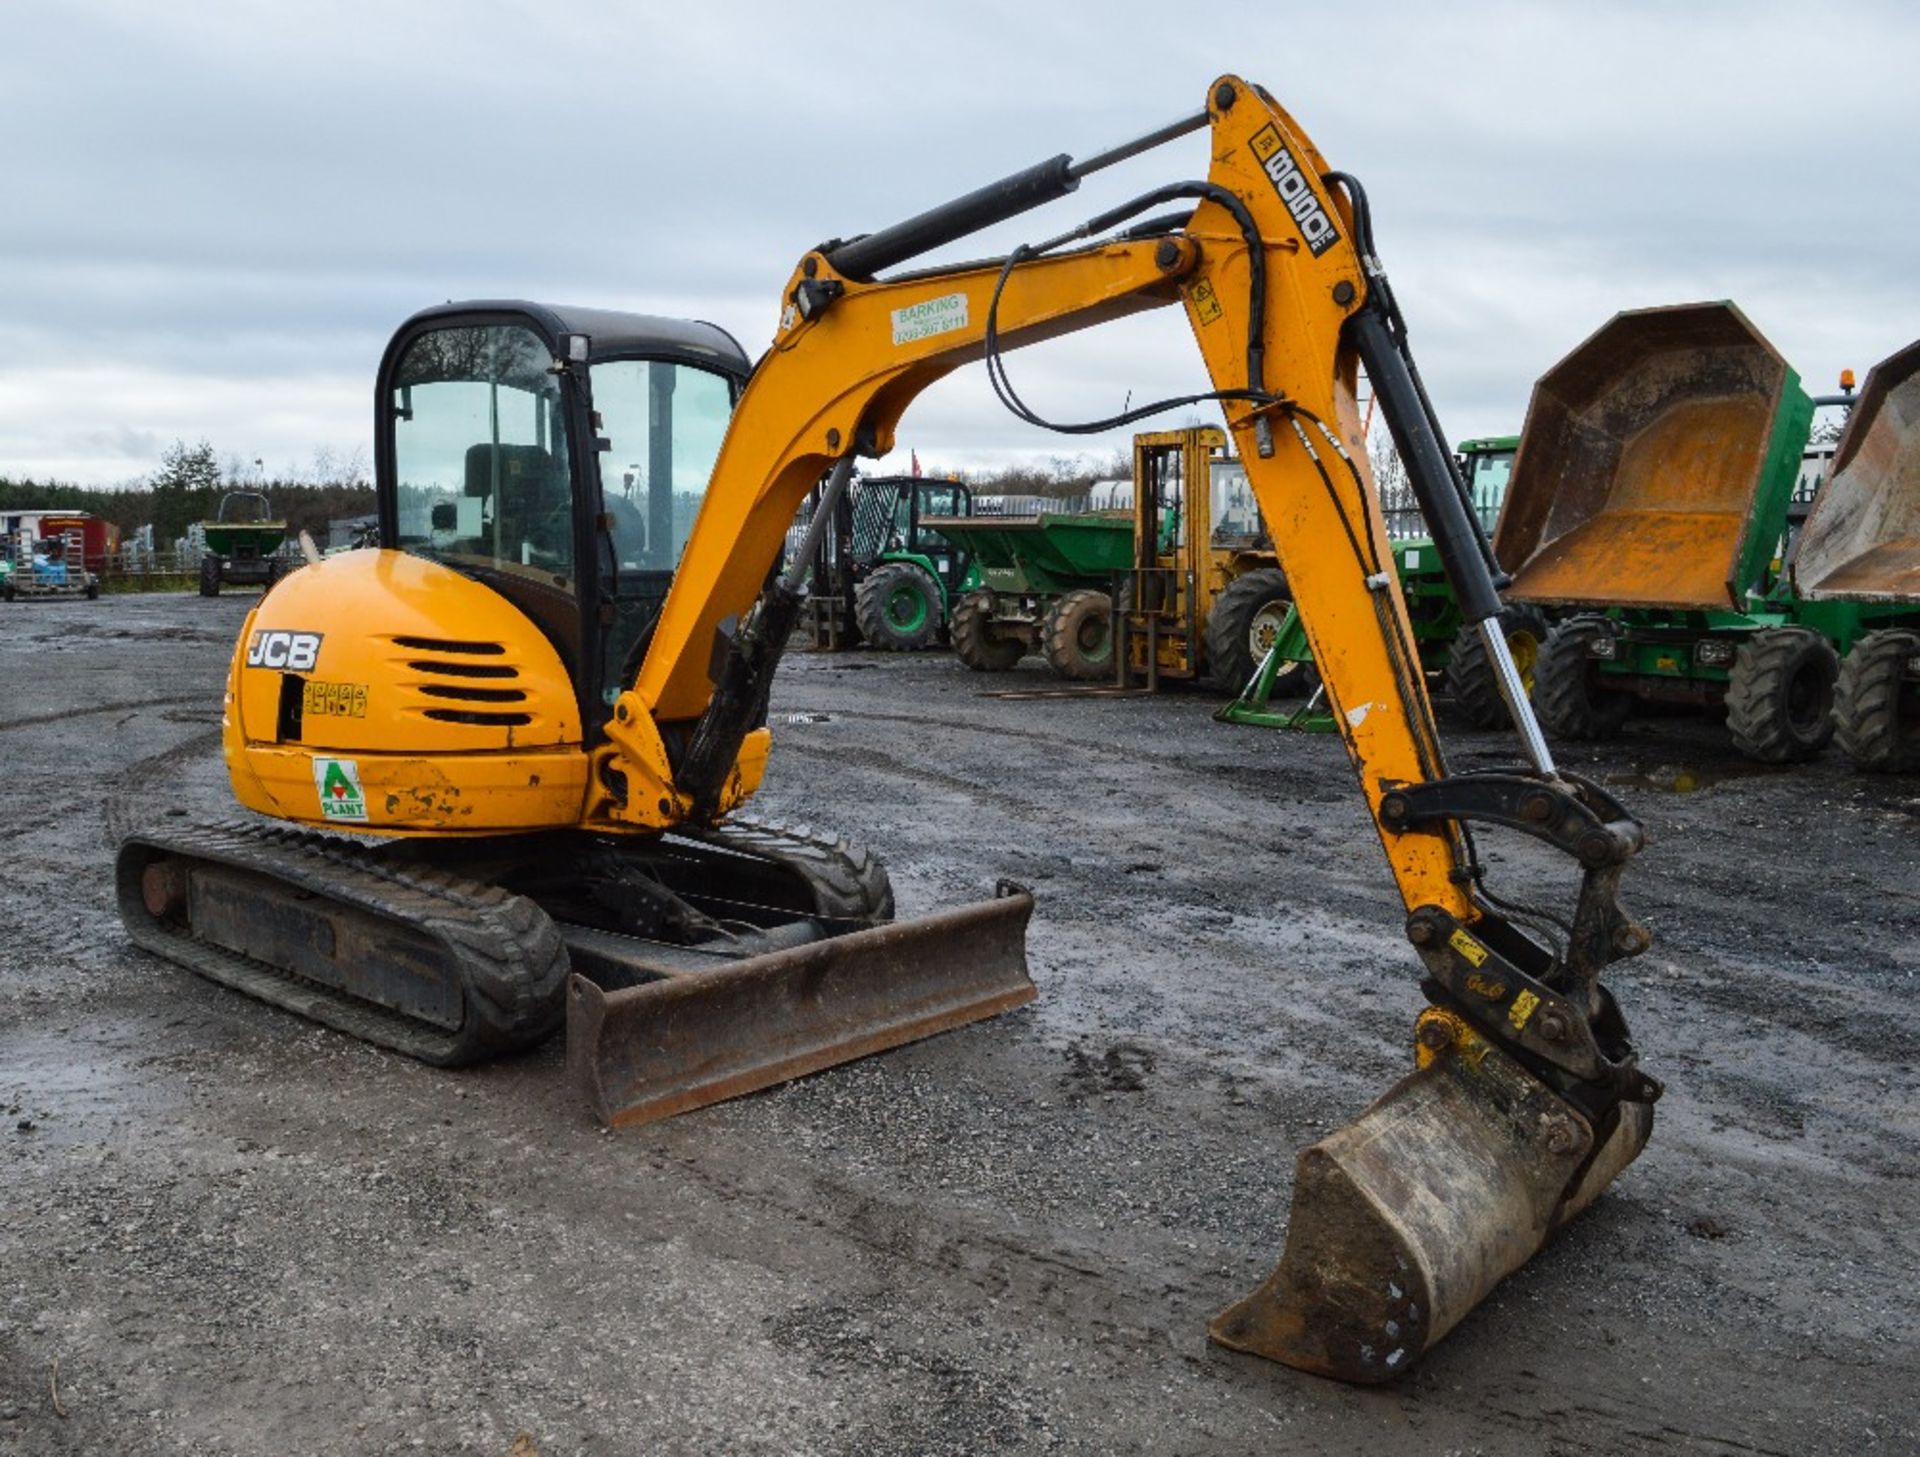 JCB 8050 RTS 5 tonne reduced tail swing rubber tracked mini excavator
Year: 2011
S/N: 1741664 - Image 4 of 12